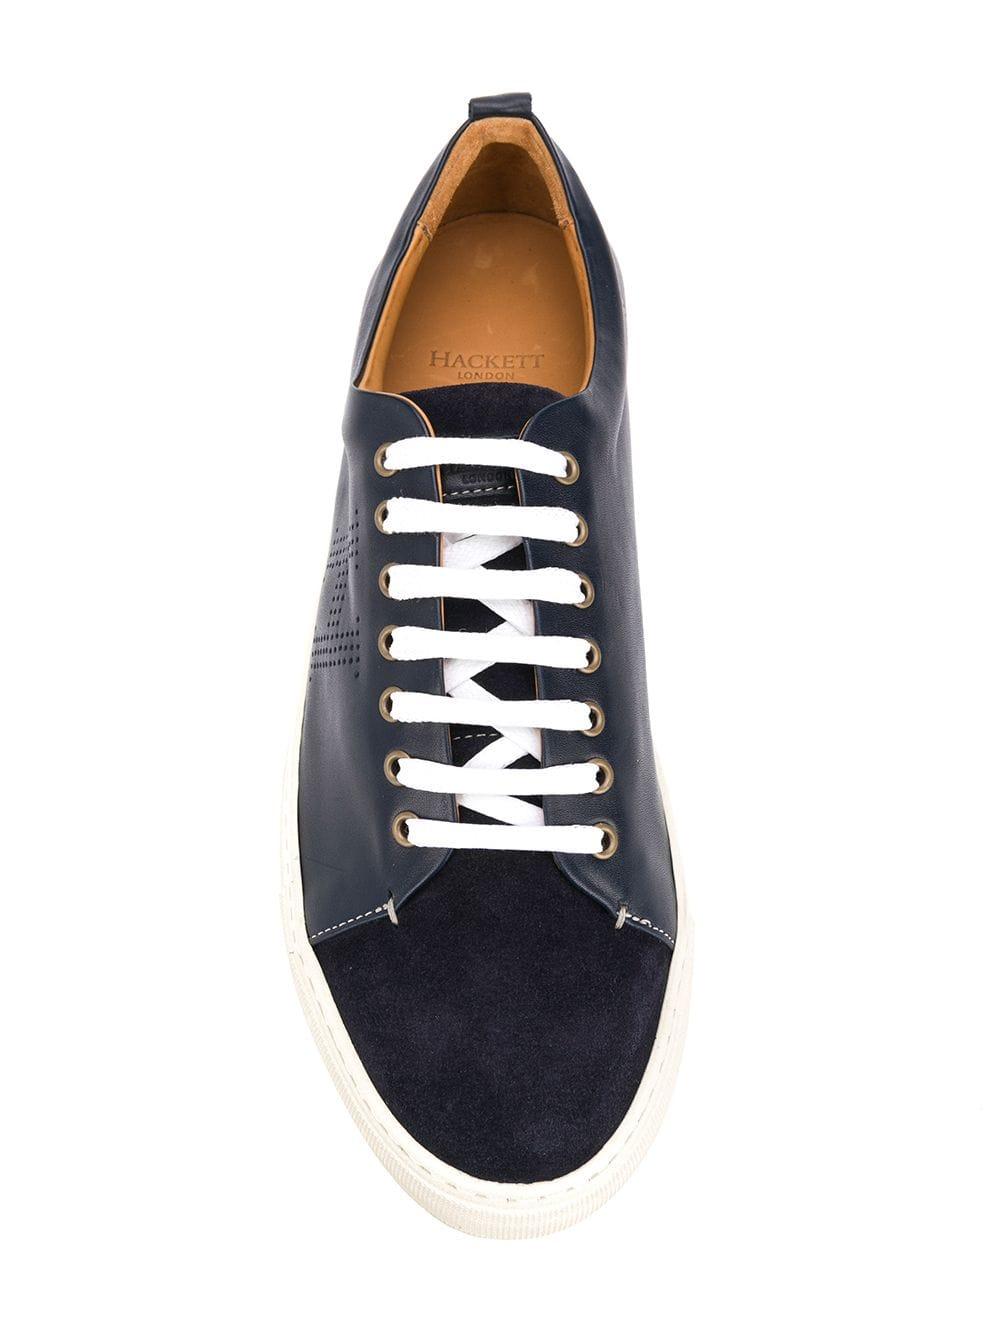 Hackett Lace-up Sneakers in Blue for Men - Lyst